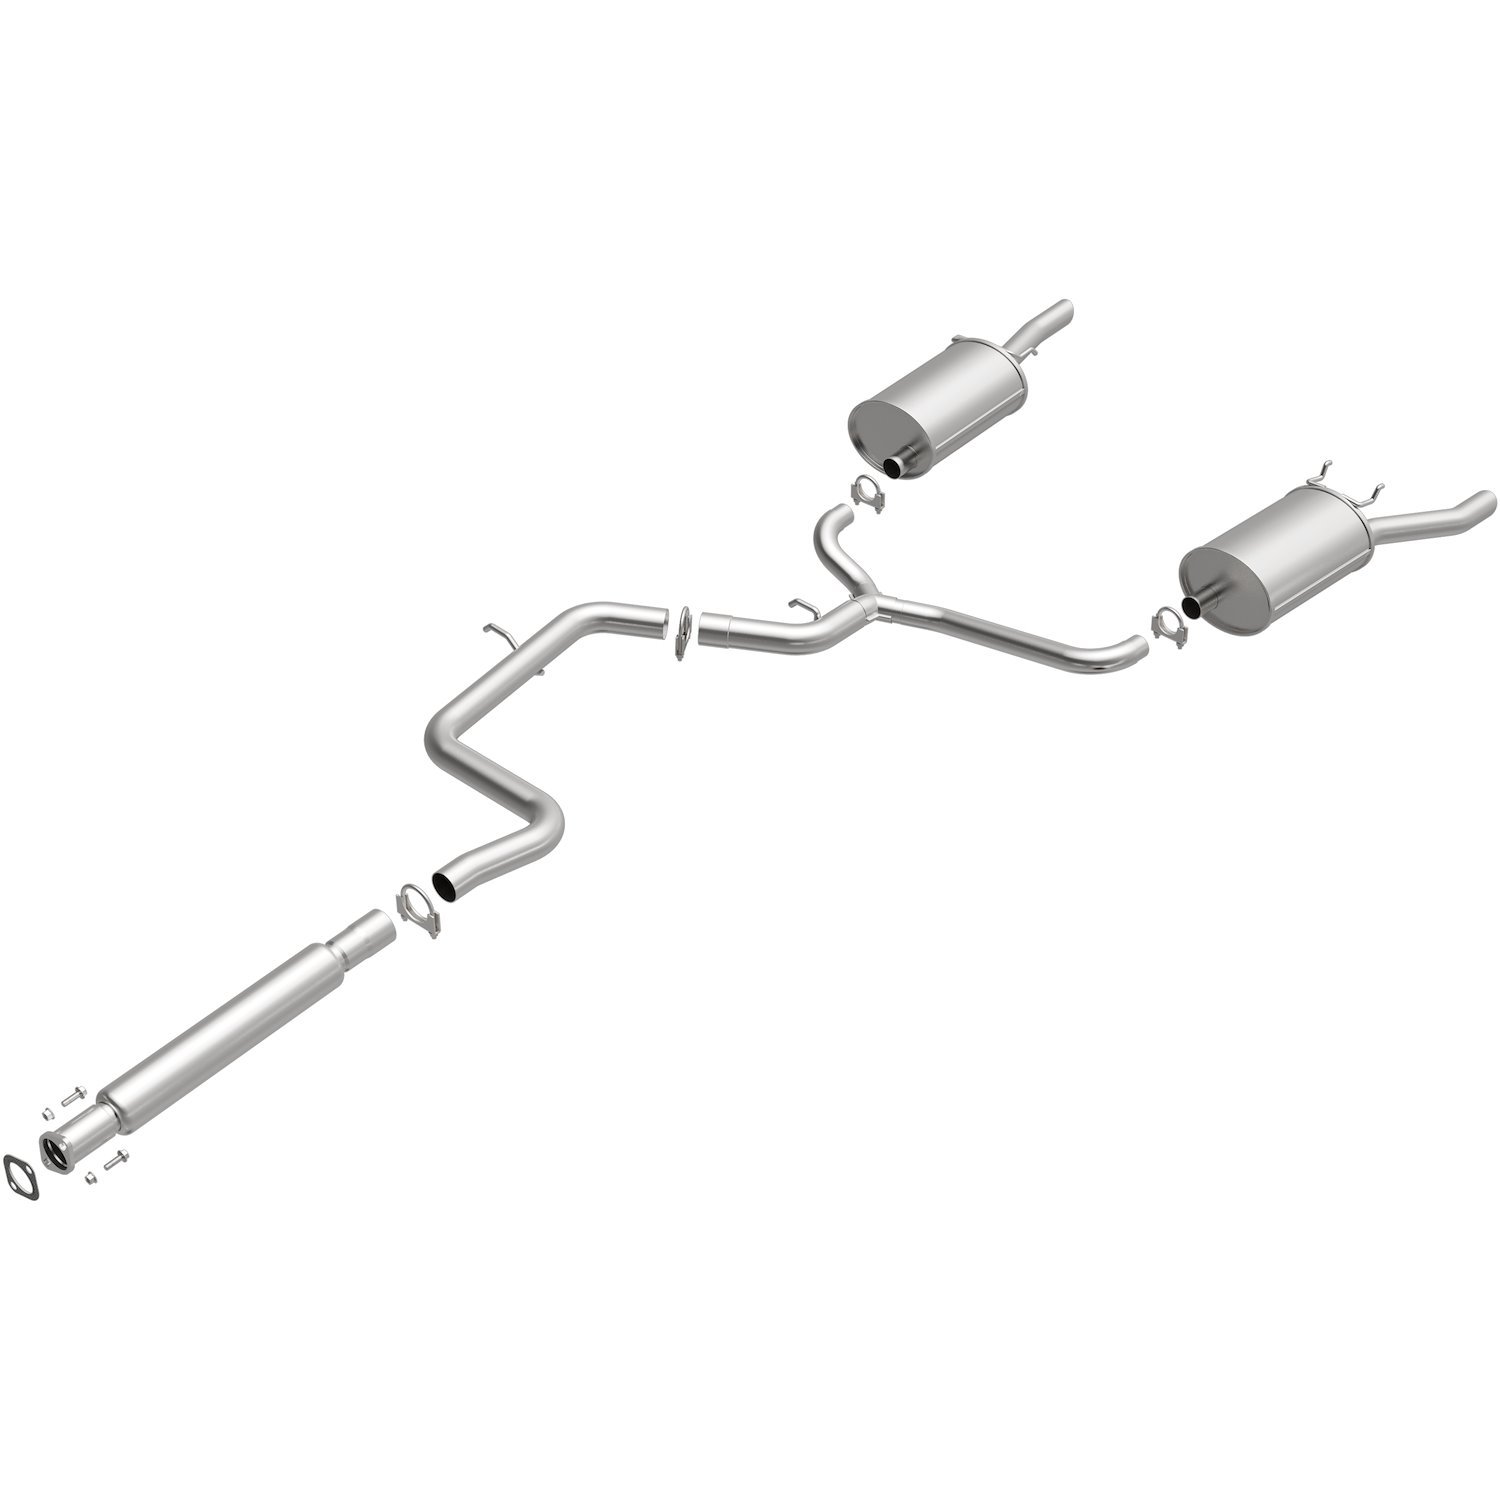 Direct-Fit Exhaust Kit, 2006-2011 Chevy Impala